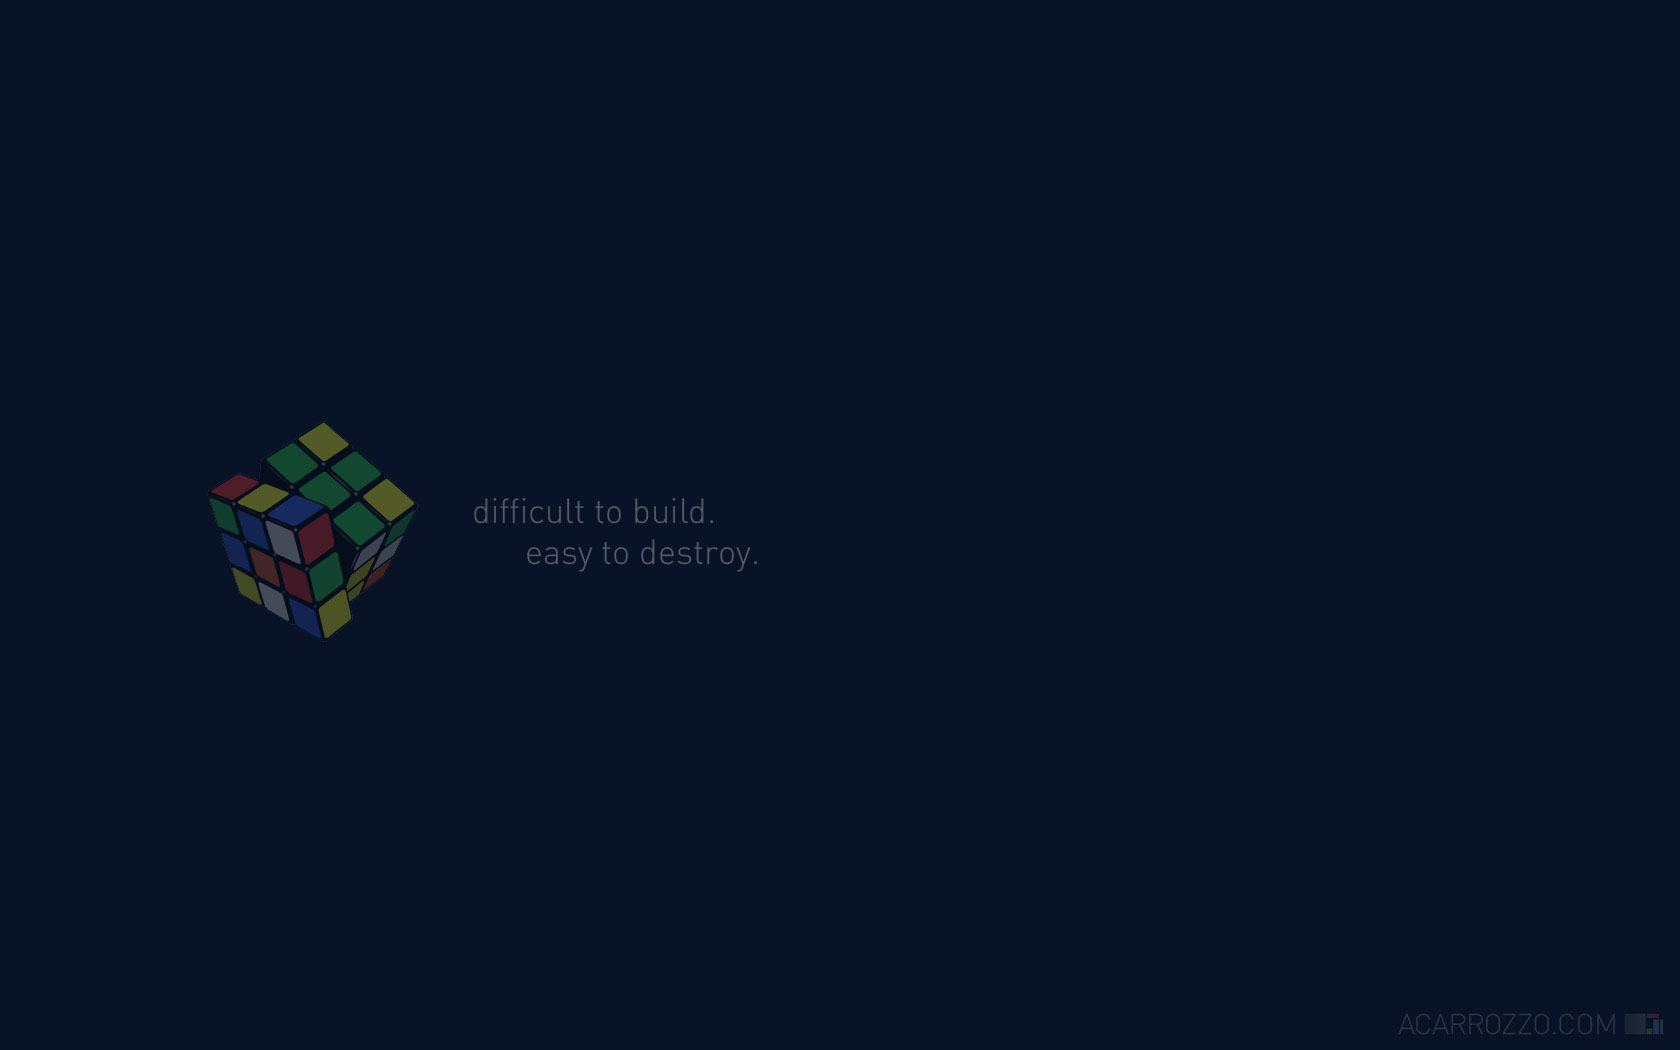 acarrozzo Wallpaper Design - Rubiks Cube - Difficult to build, easy to destroy